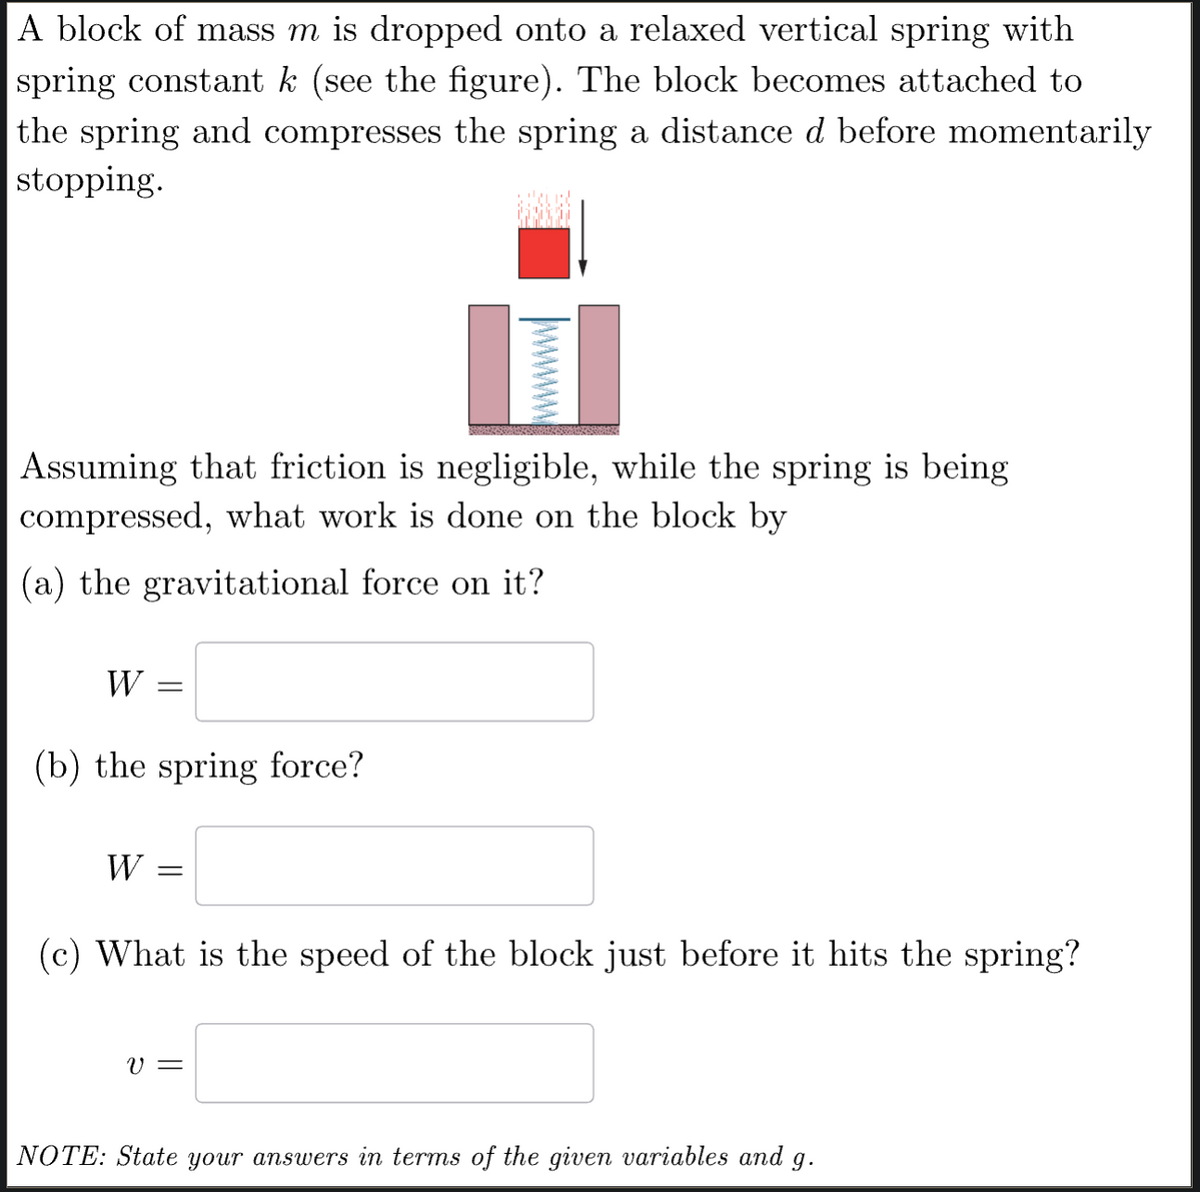 A block of mass m is dropped onto a relaxed vertical spring with
spring constant k (see the figure). The block becomes attached to
the spring and compresses the spring a distance d before momentarily
stopping.
wwwwww
Assuming that friction is negligible, while the spring is being
compressed, what work is done on the block by
(a) the gravitational force on it?
W =
(b) the spring force?
W =
(c) What is the speed of the block just before it hits the spring?
v =
NOTE: State your answers in terms of the given variables and 9.